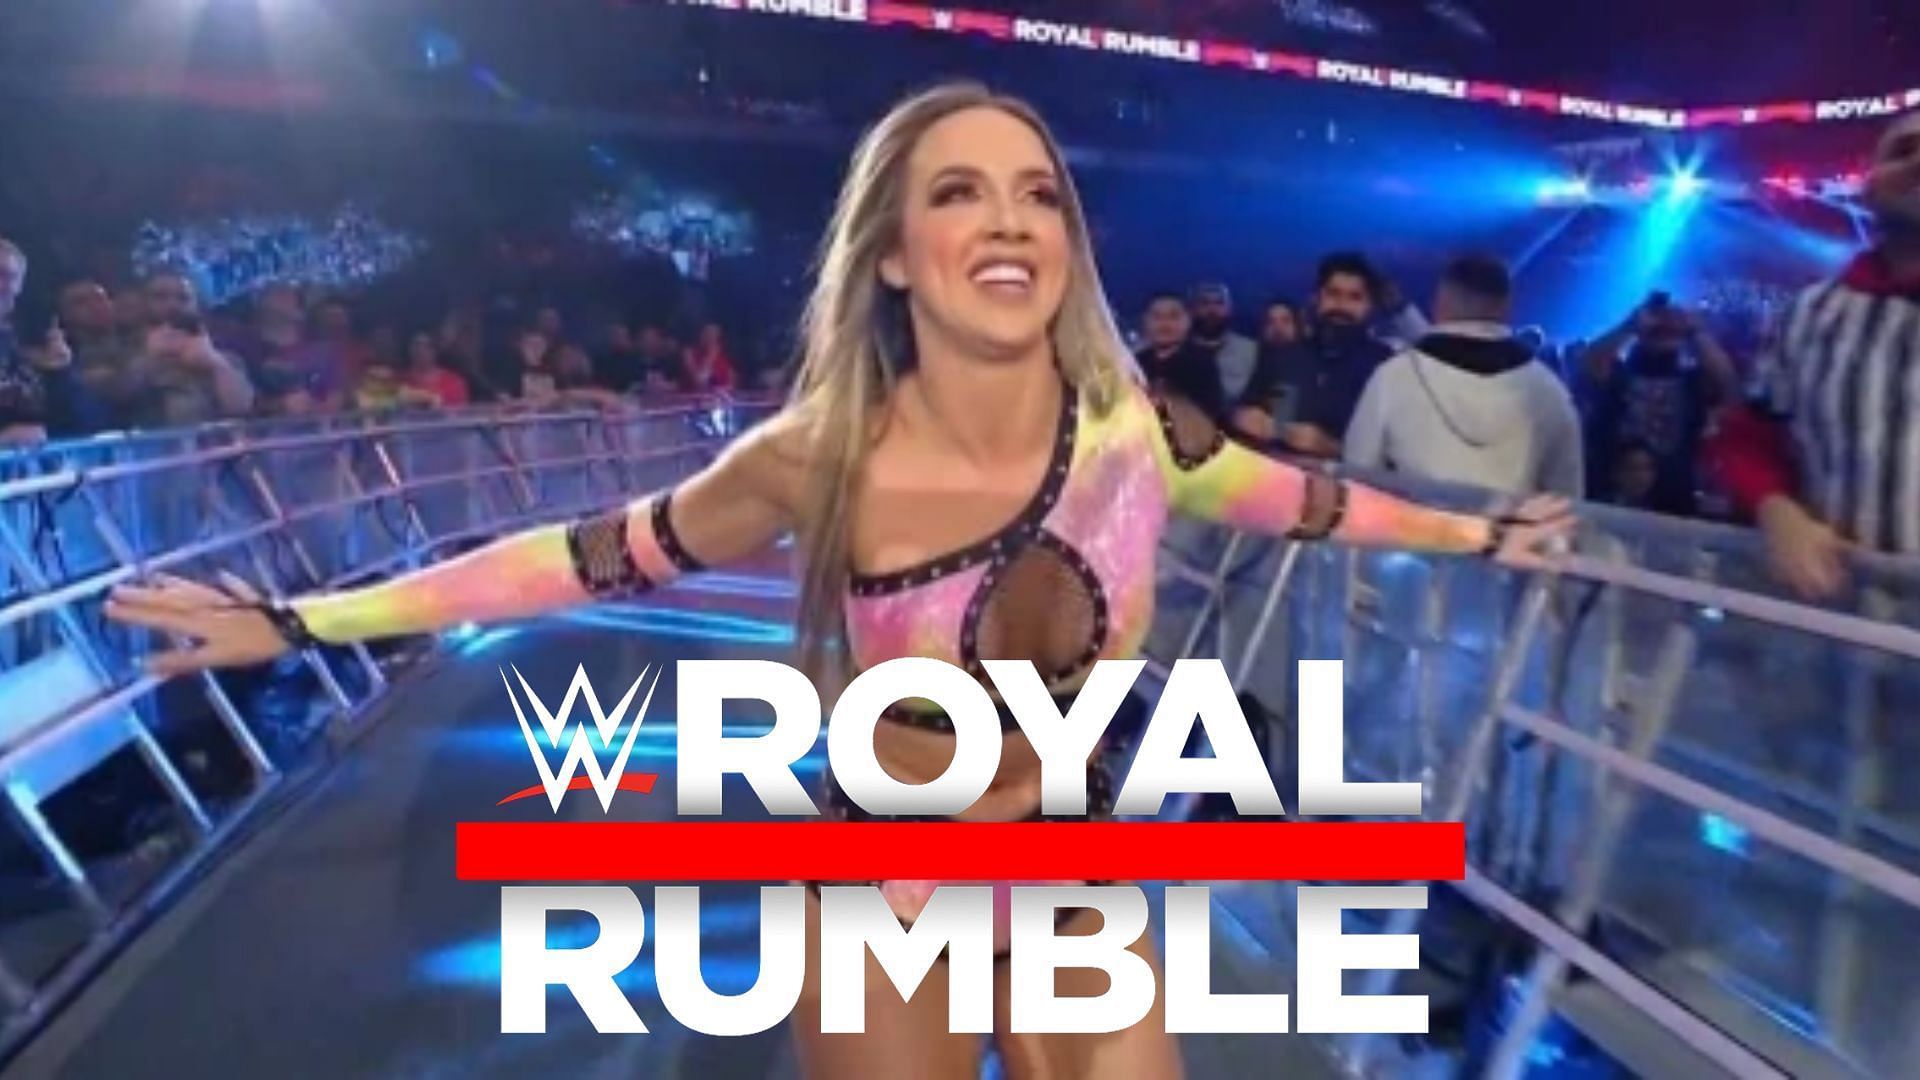 Chelsea Green returned to WWE at the Royal Rumble